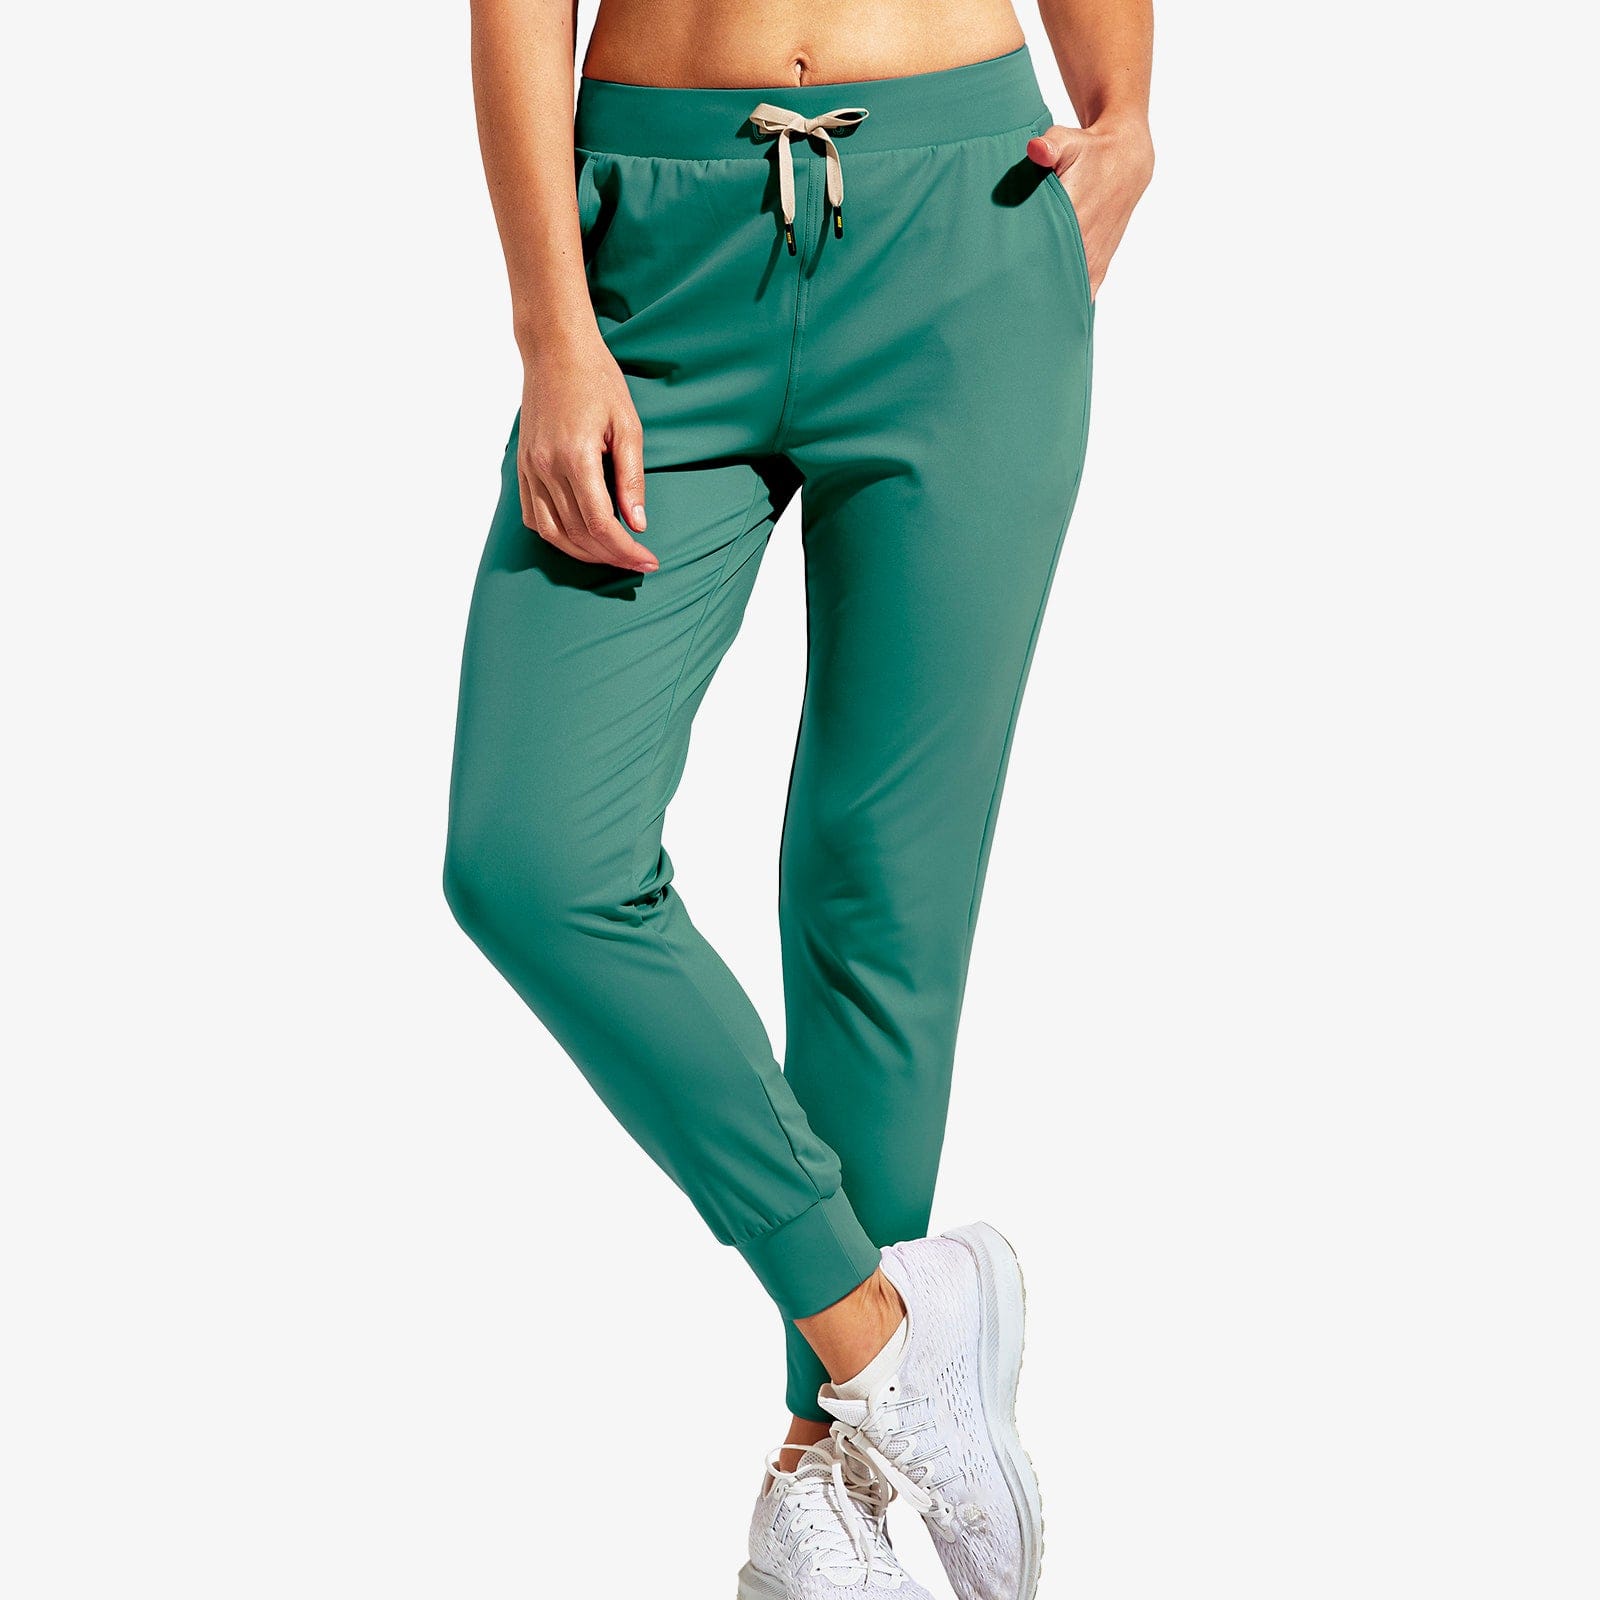 Women's Joggers with Pockets Lightweight Athletic Sweatpants - Green / XS